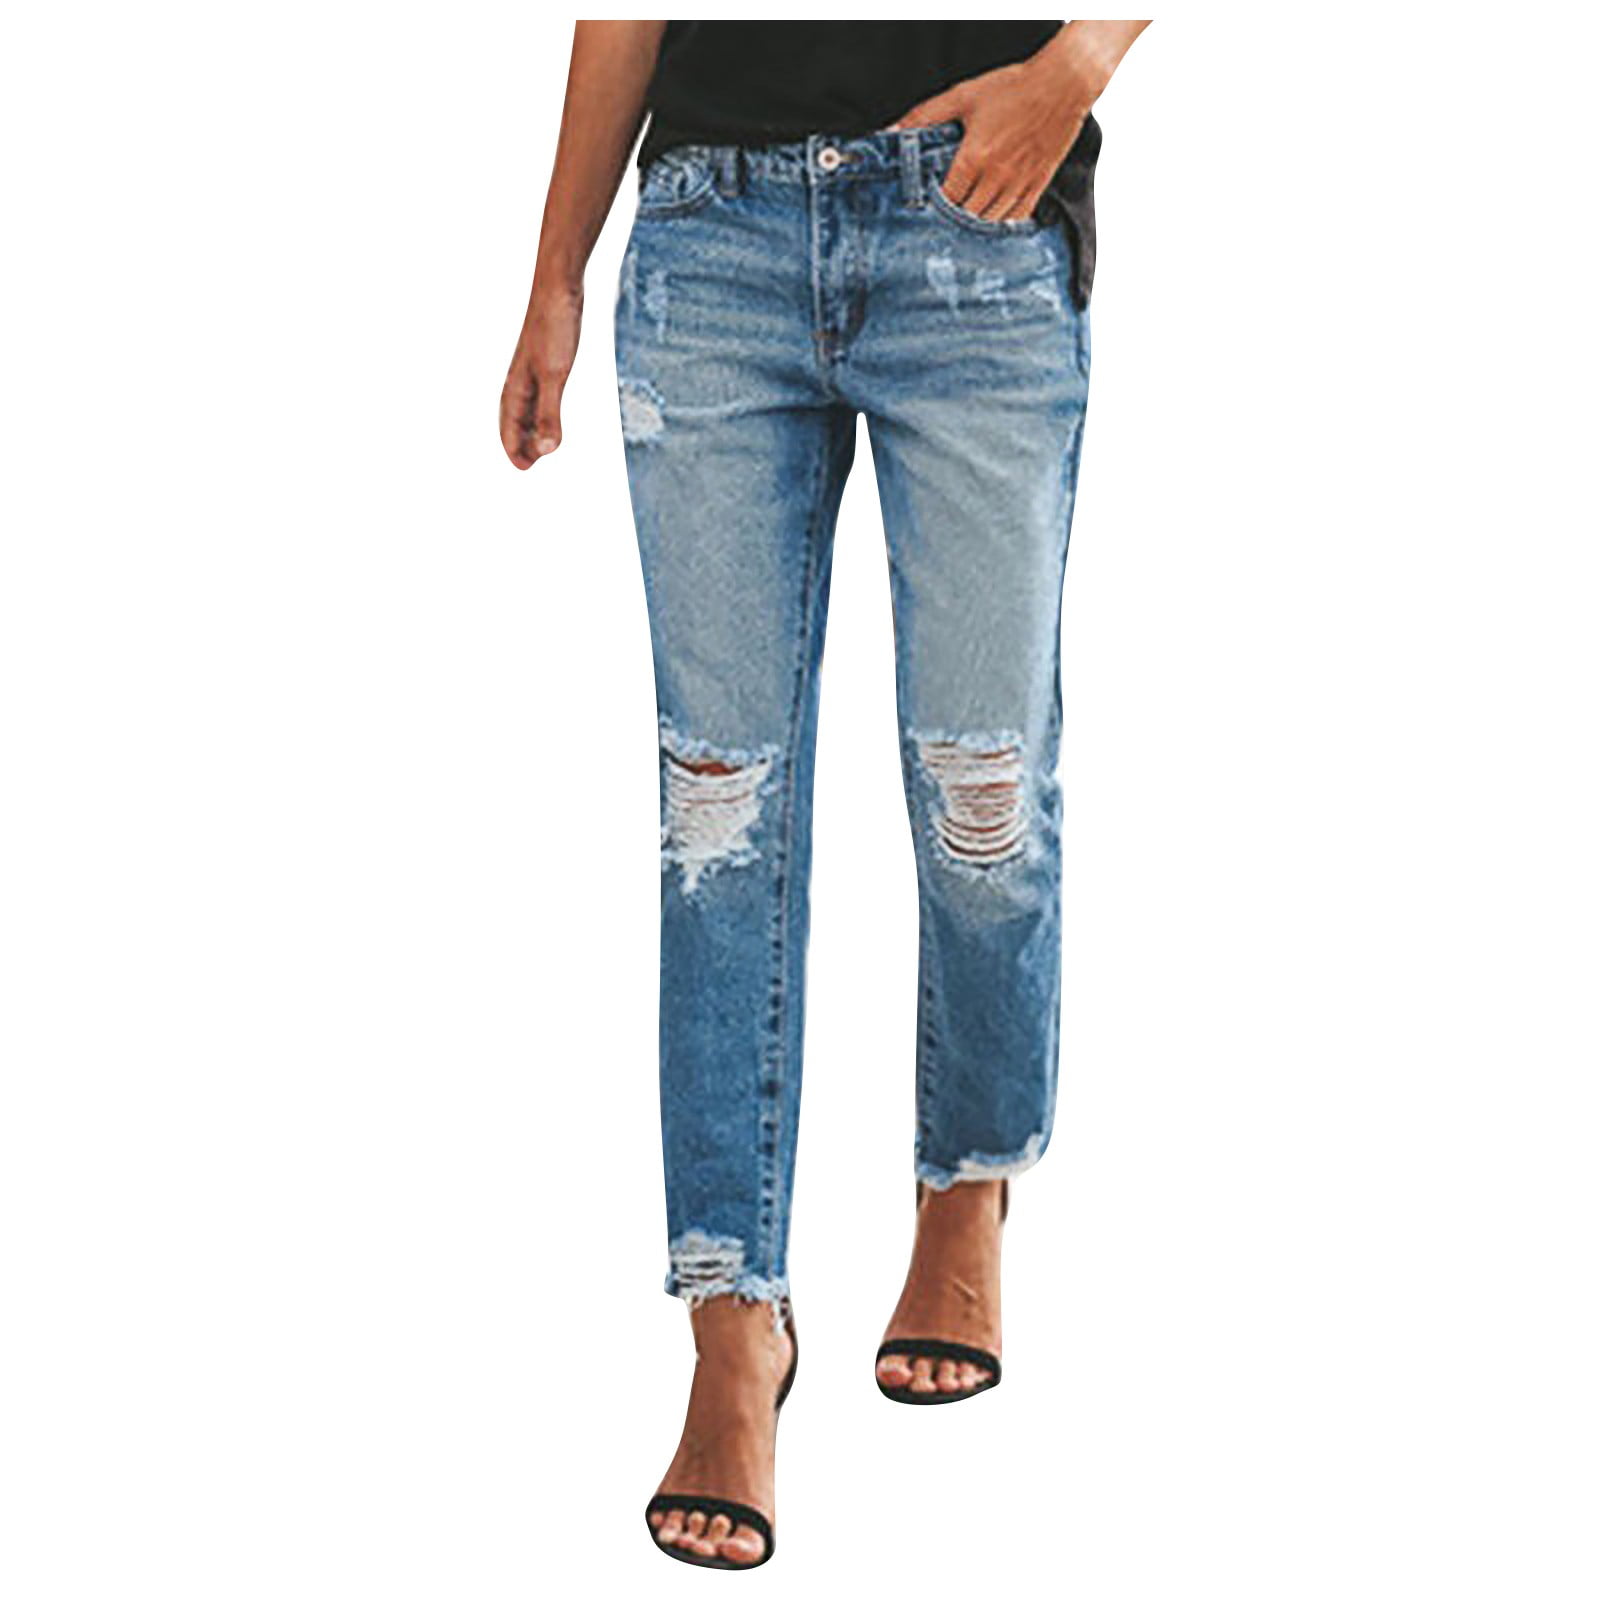 Ruziyoog Women Ripped Jeans Low Rise Jeans Flares Fashion Baggy Jeans ...